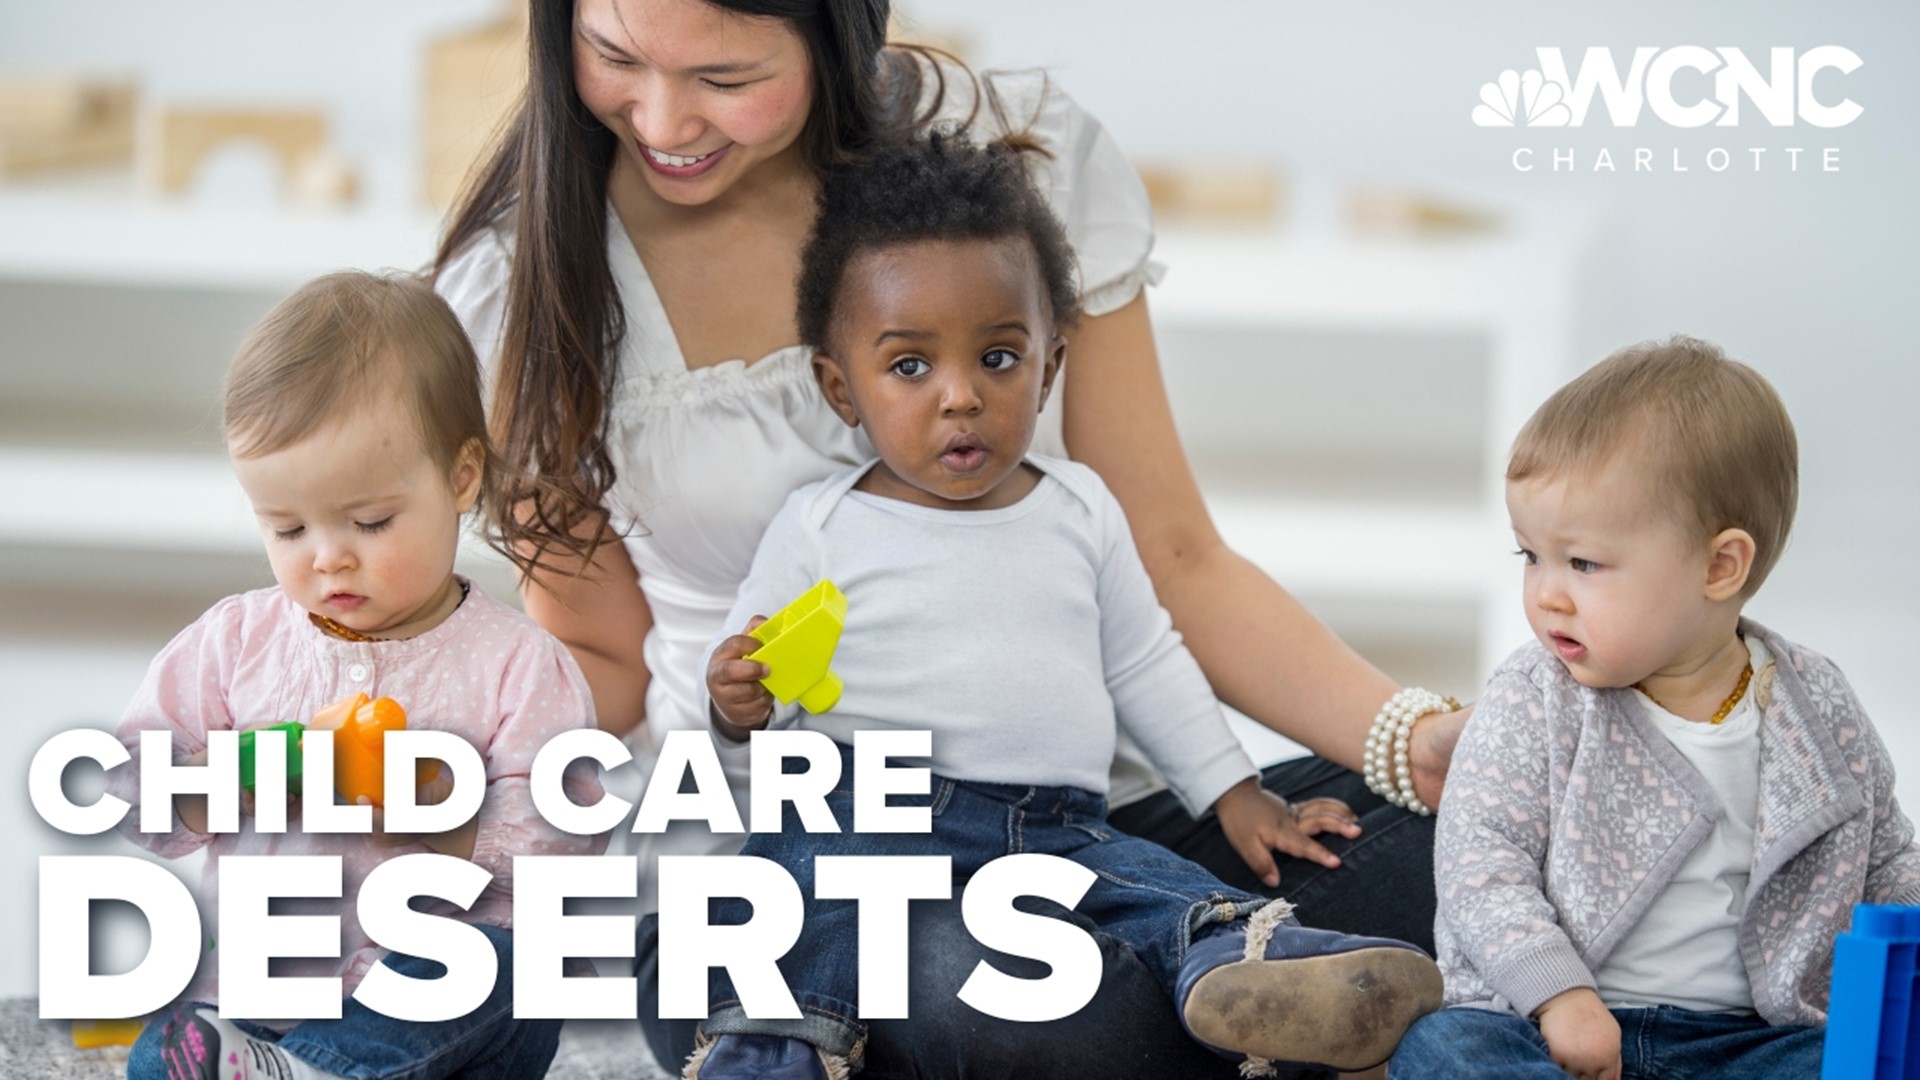 There is a shortage of childcare options across North Carolina.